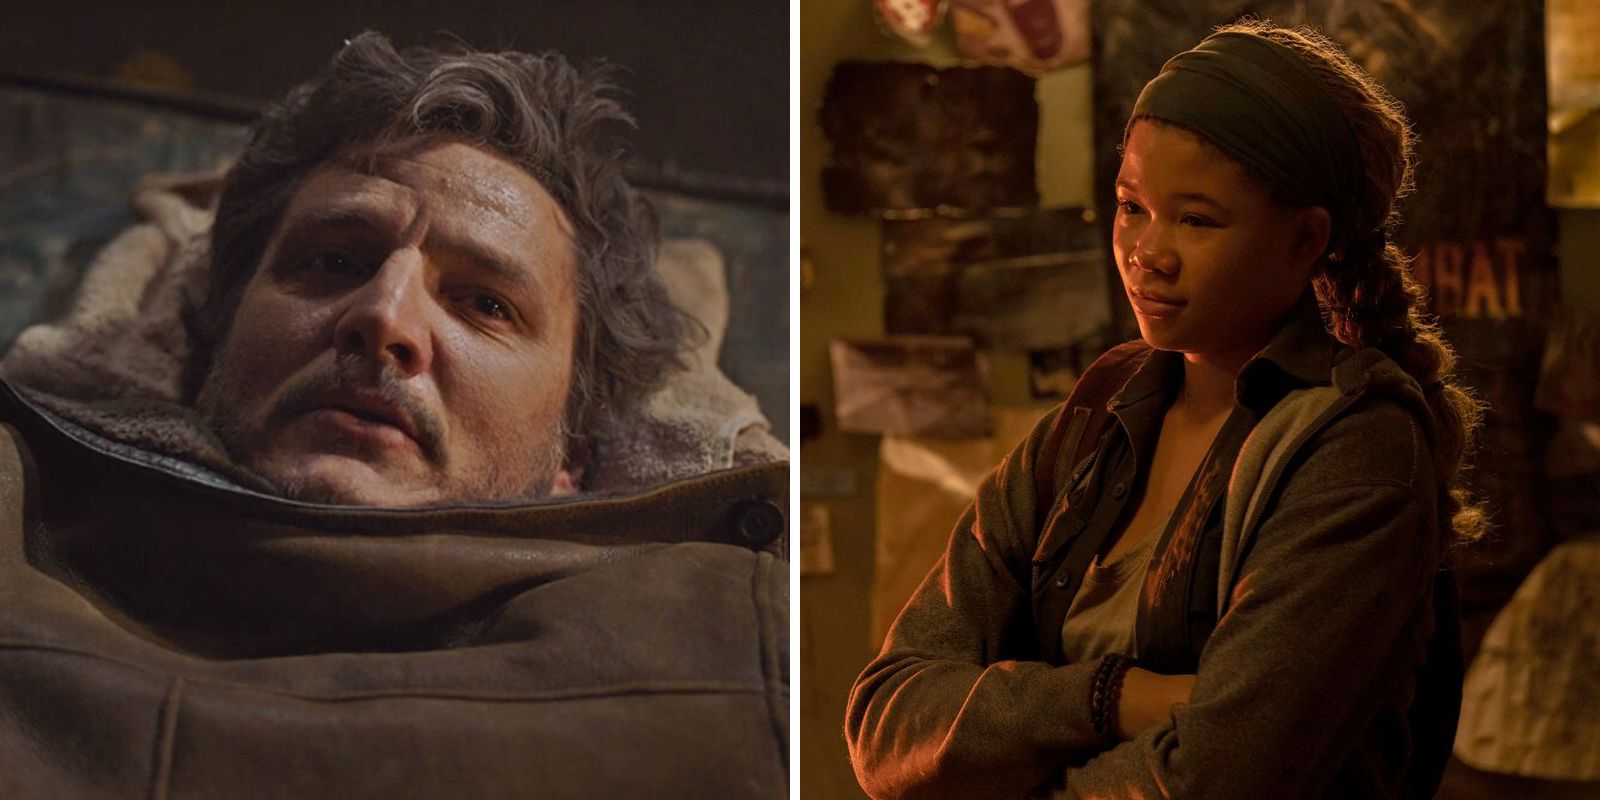 Joel is blanketed to try to stay warm and Riley in Ellie's room in episode seven of HBO's The Last of Us